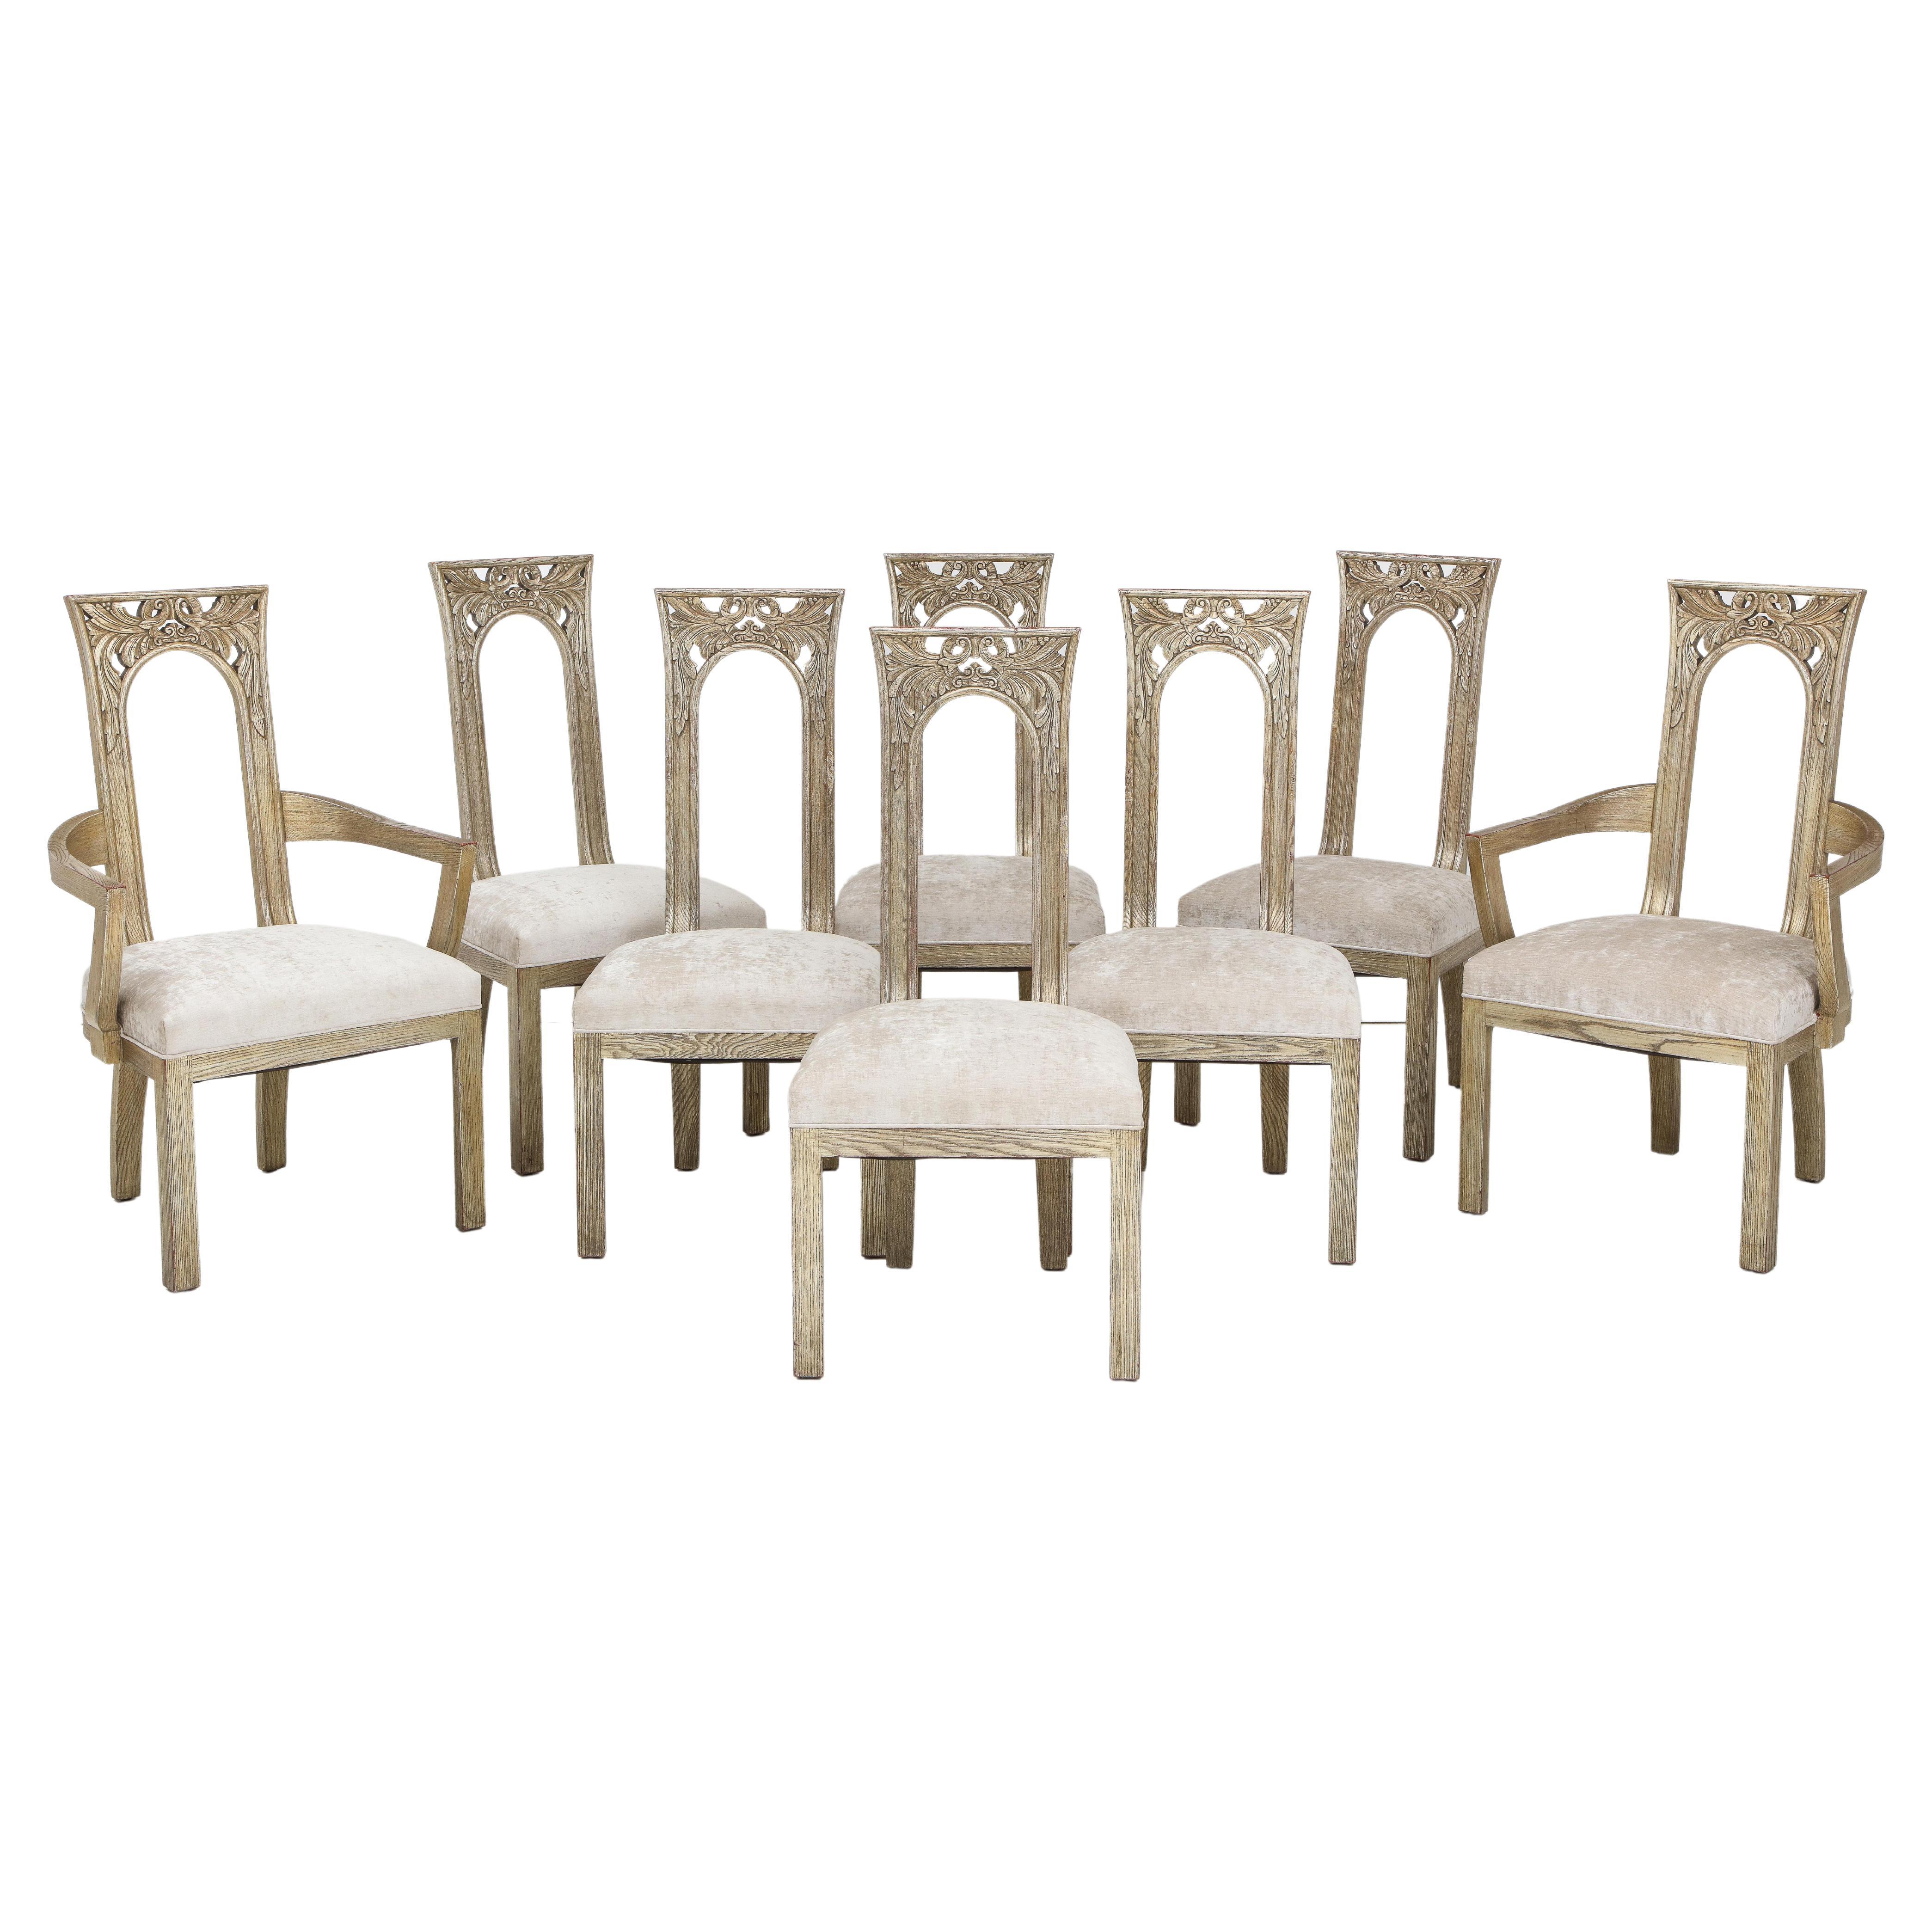 Set of Eight Art Deco Influenced Dining Chairs by James Mont